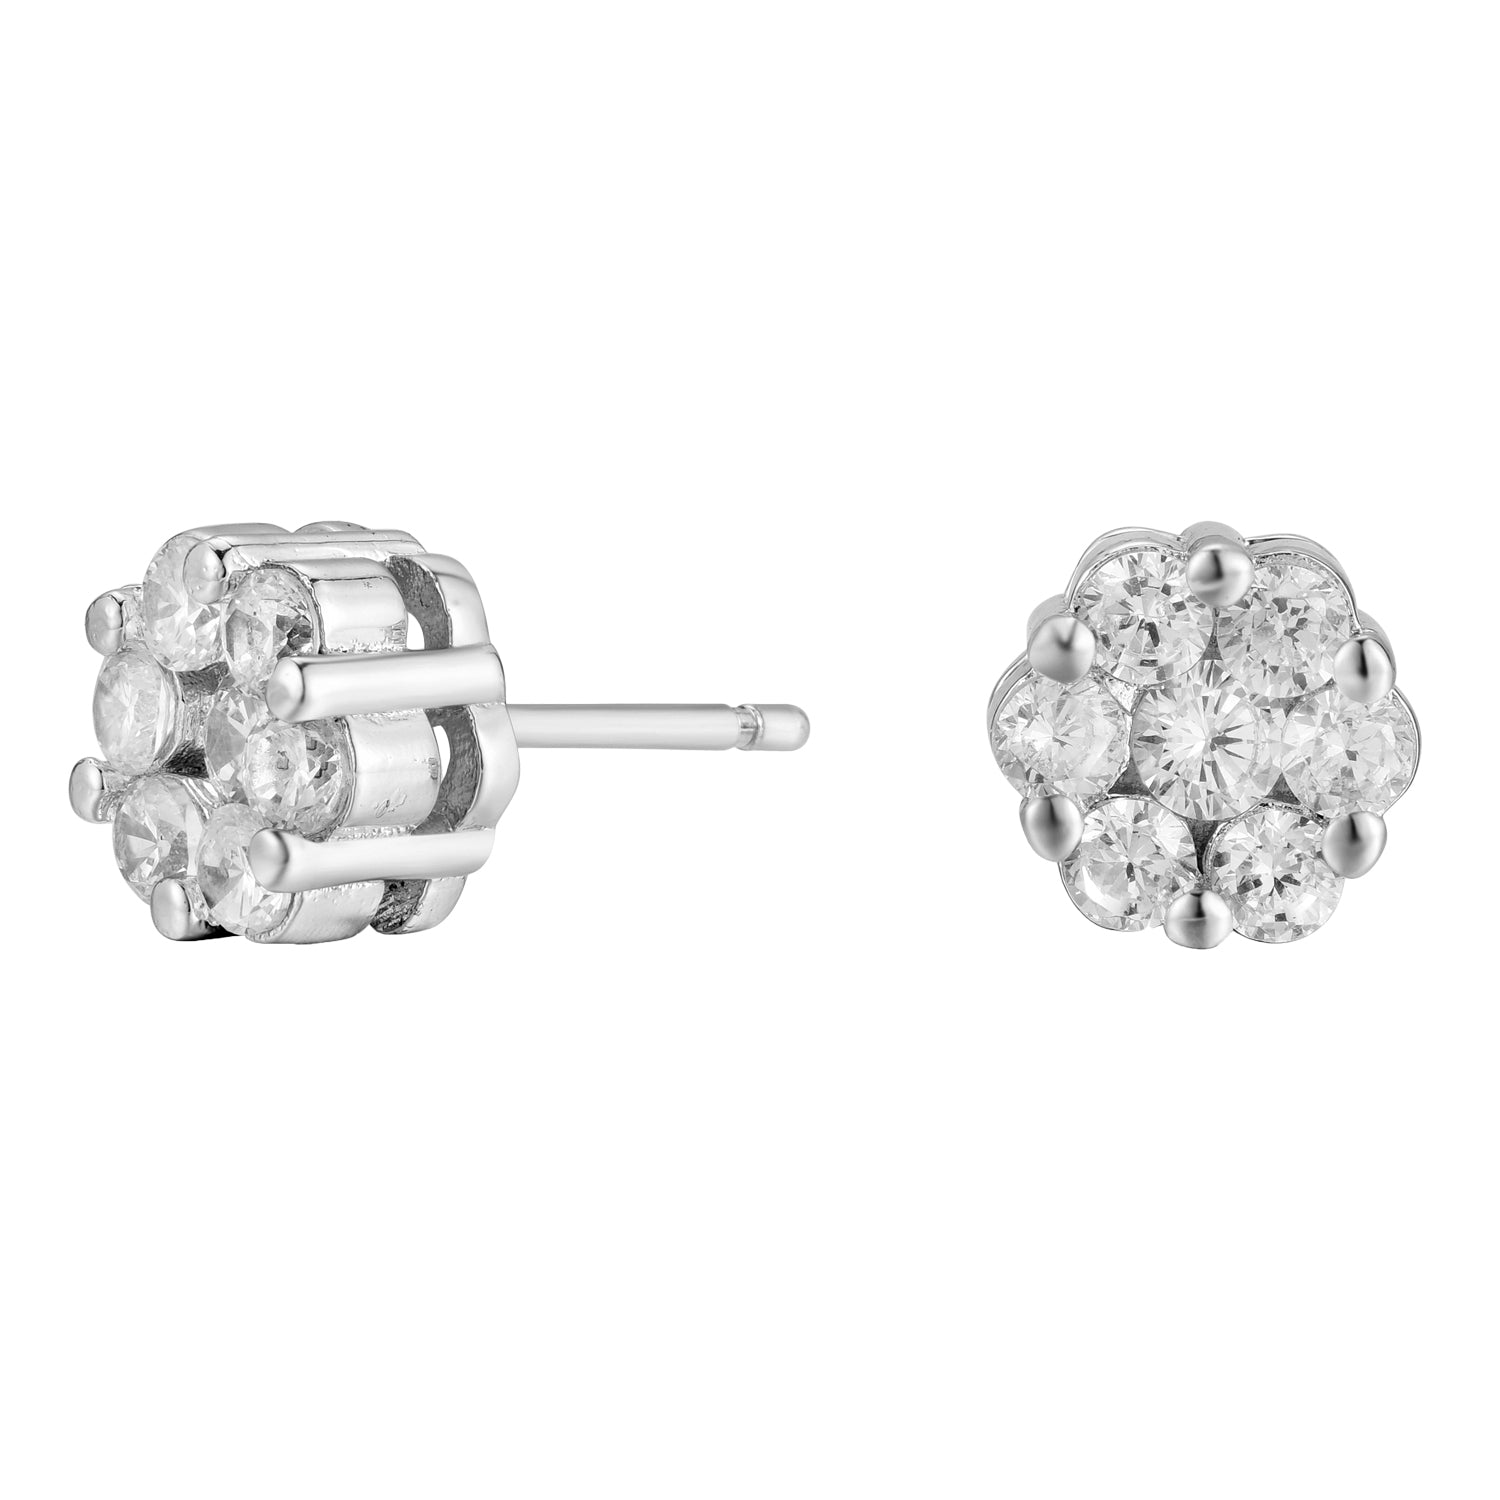 Nova 18k White Gold Stud Earrings with Cubic Zirconia Crystals